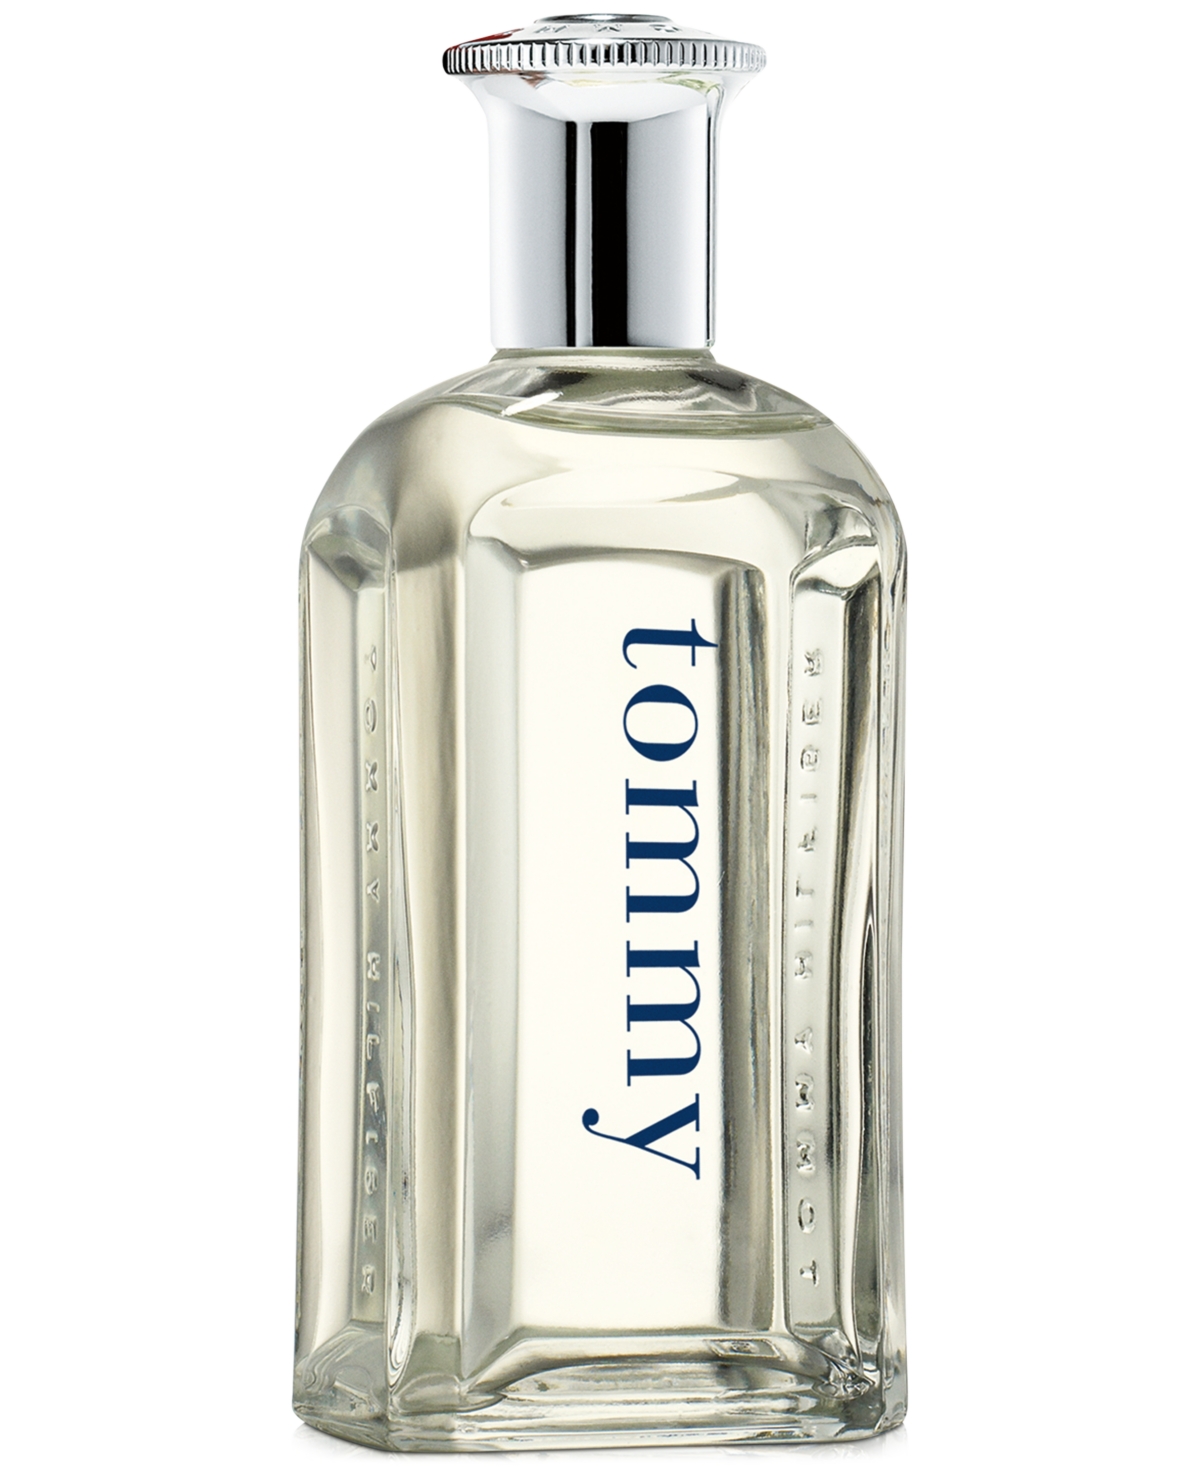 Tommy/Tommy Hilfiger Edt/Cologne Spray New Packaging 3.4 Oz